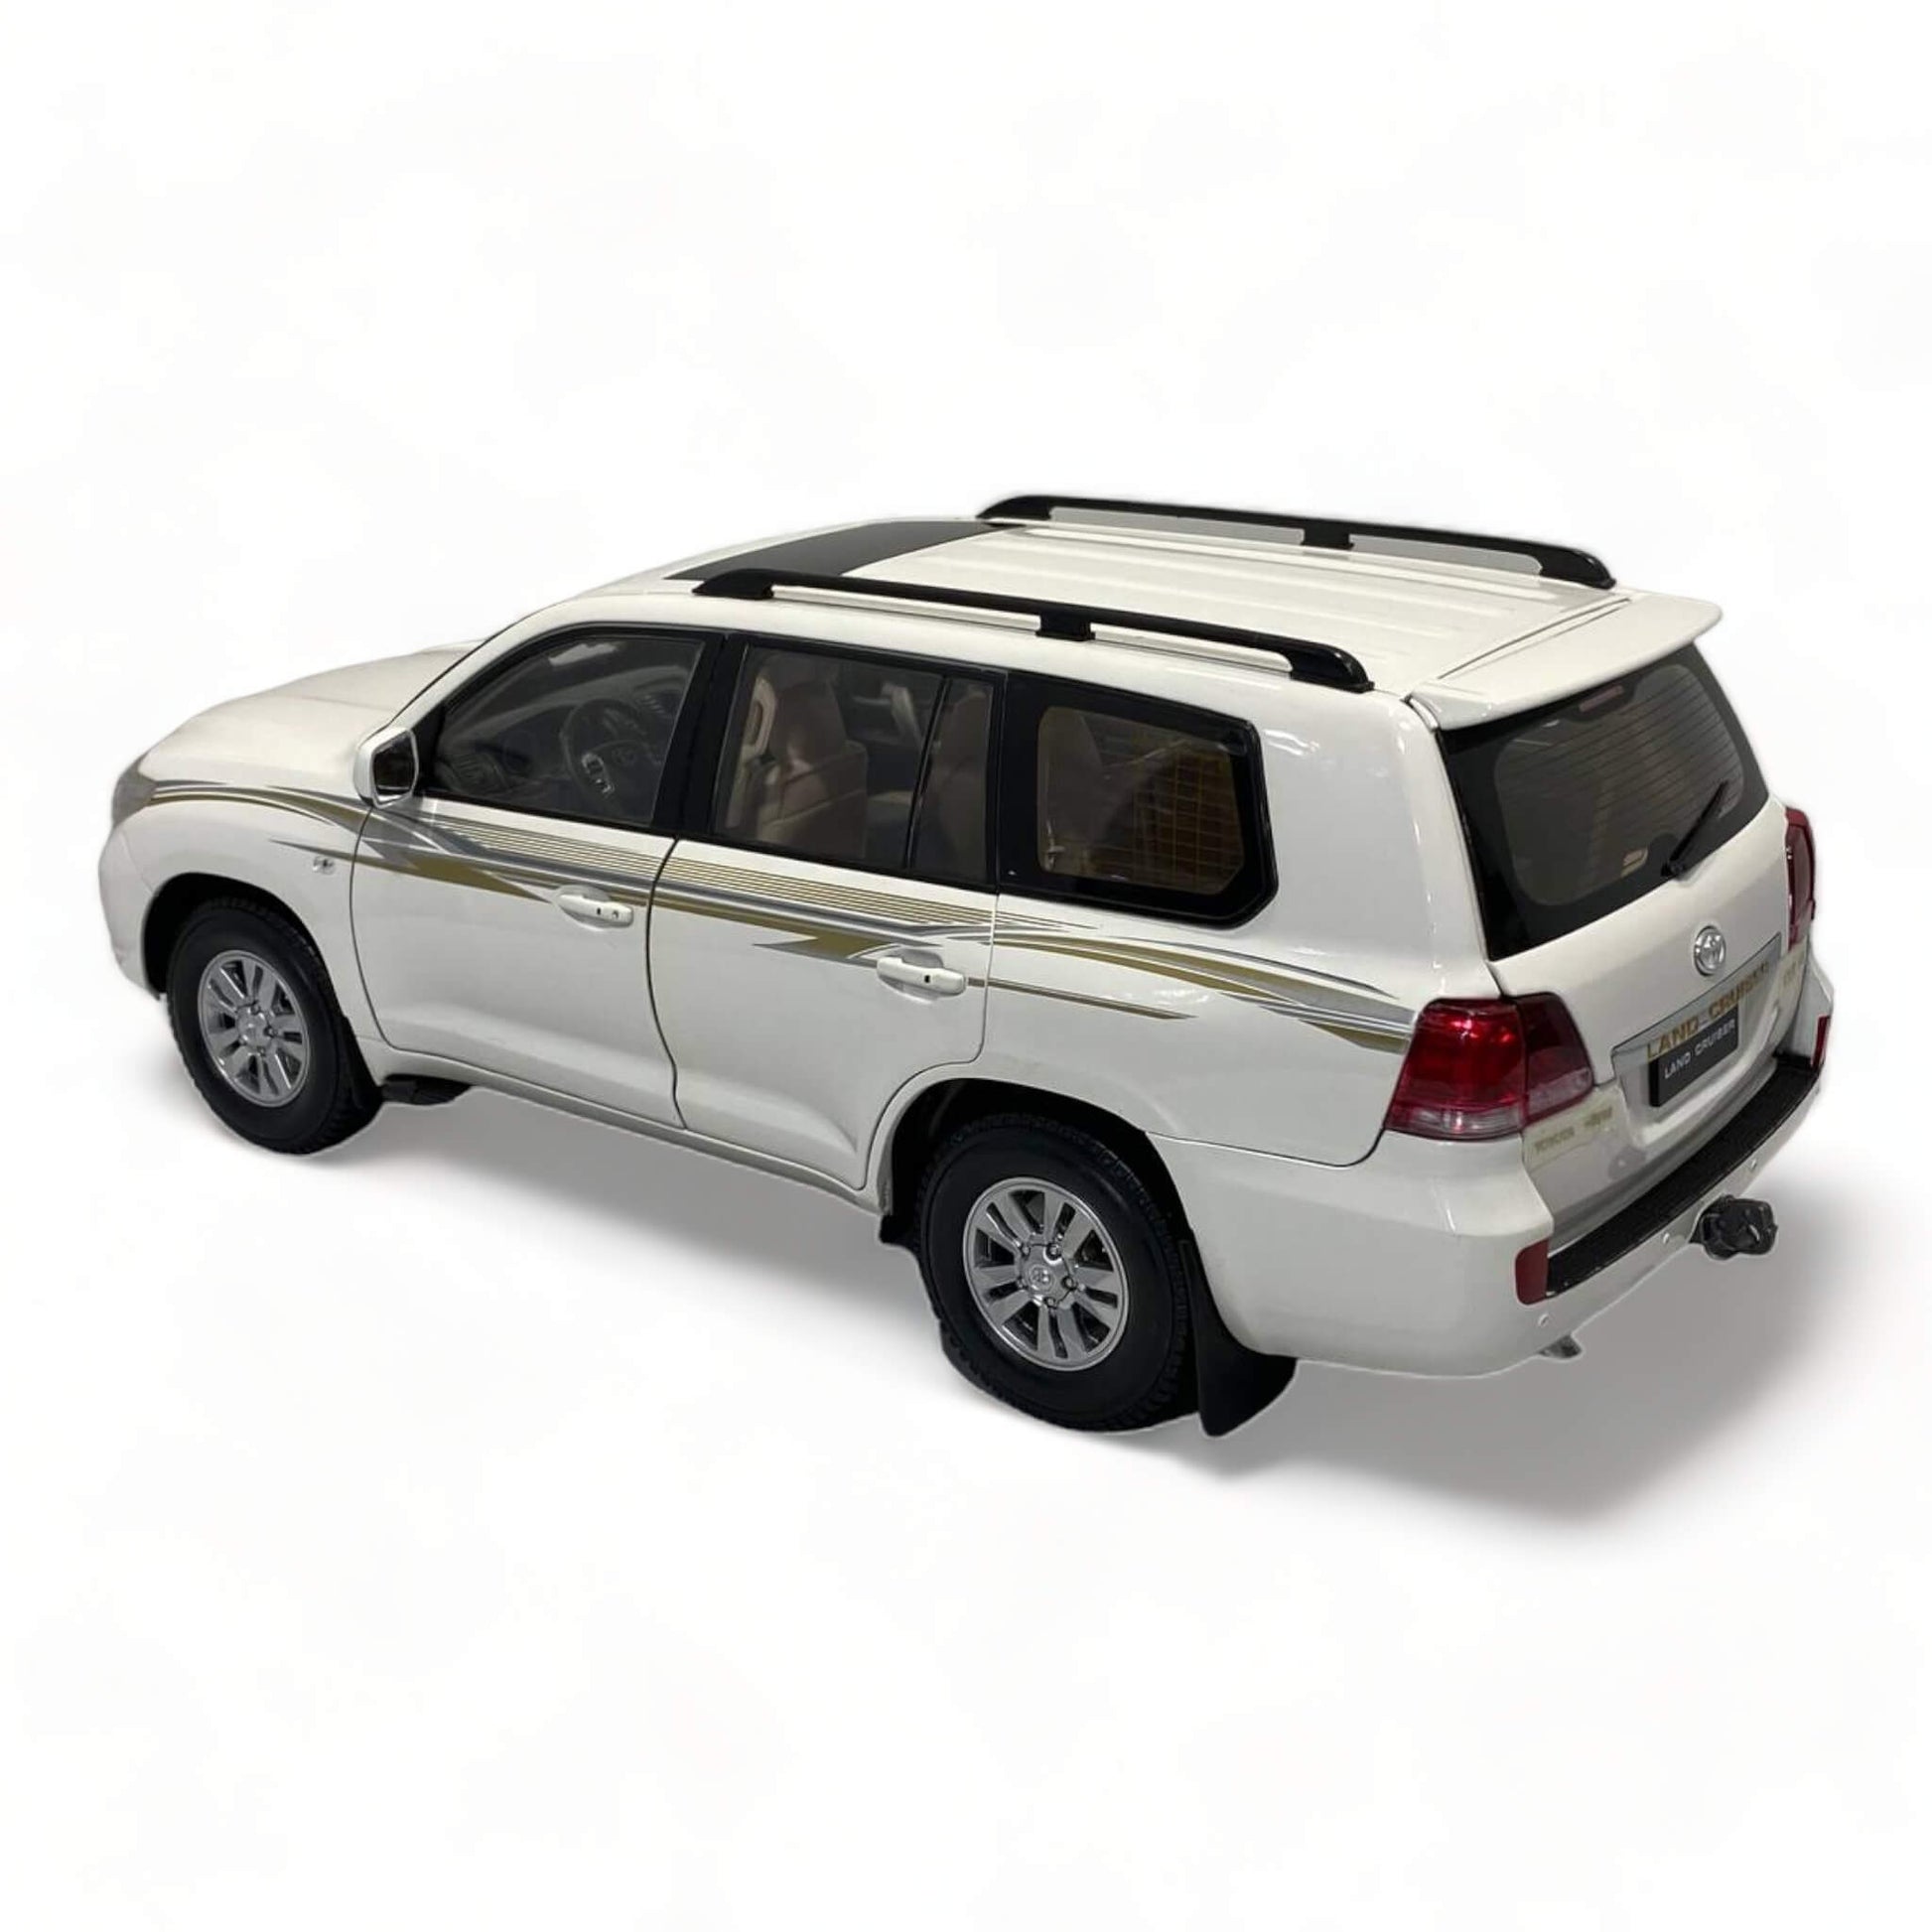 1/18 Diecast Toyota Land Cruiser LC200 Gold Grill White 2008 FAW Toys Scale Model Car|Sold in Dturman.com Dubai UAE.